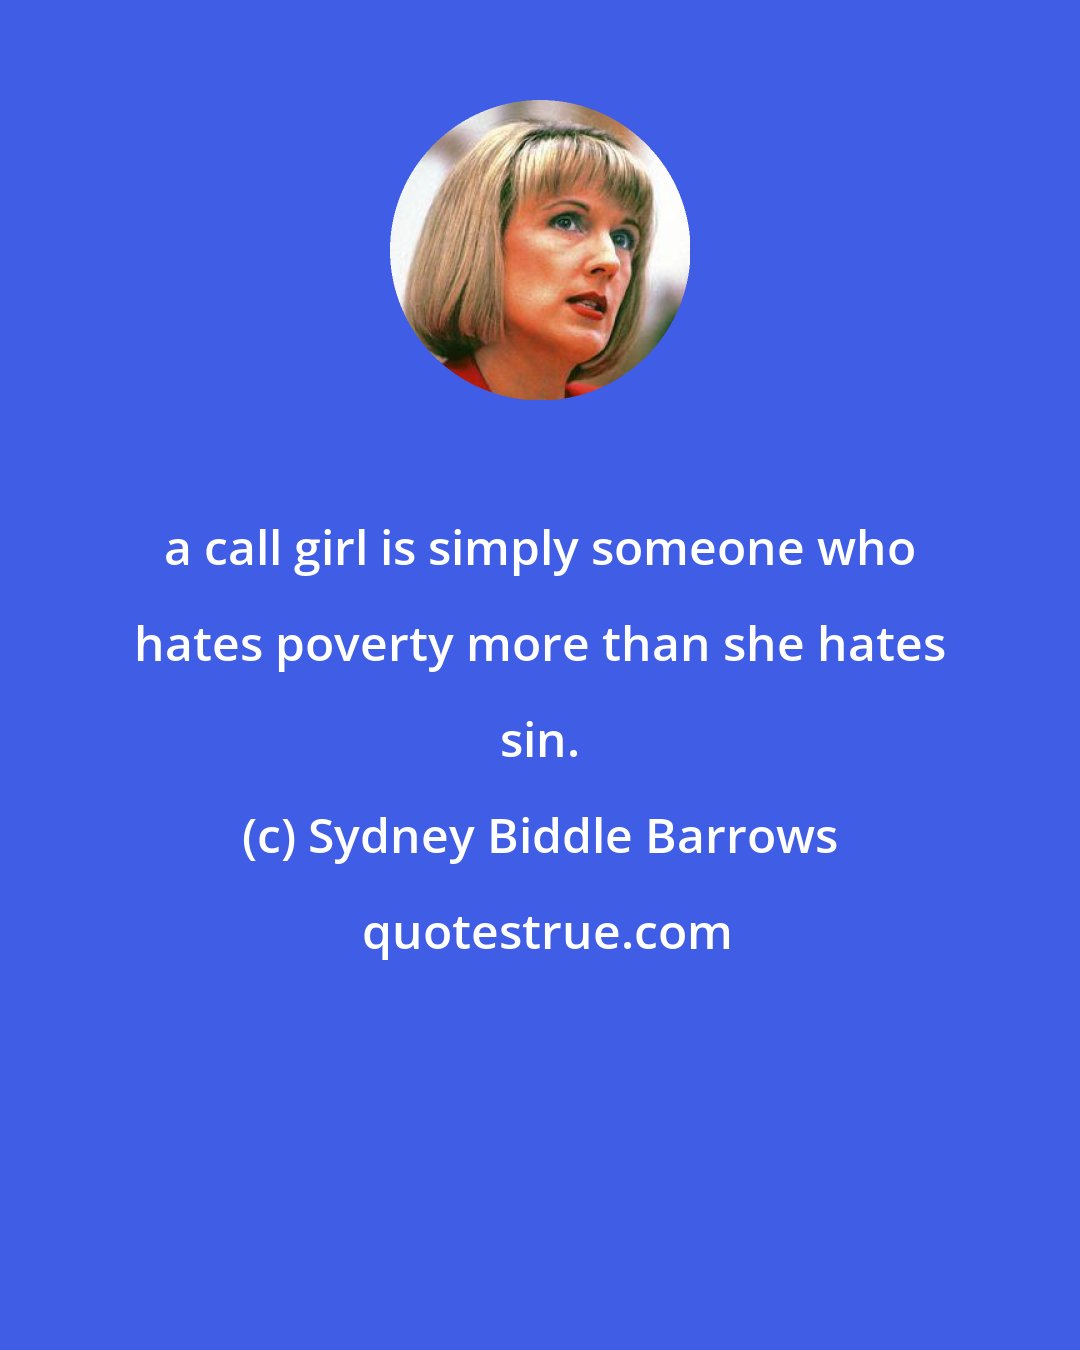 Sydney Biddle Barrows: a call girl is simply someone who hates poverty more than she hates sin.